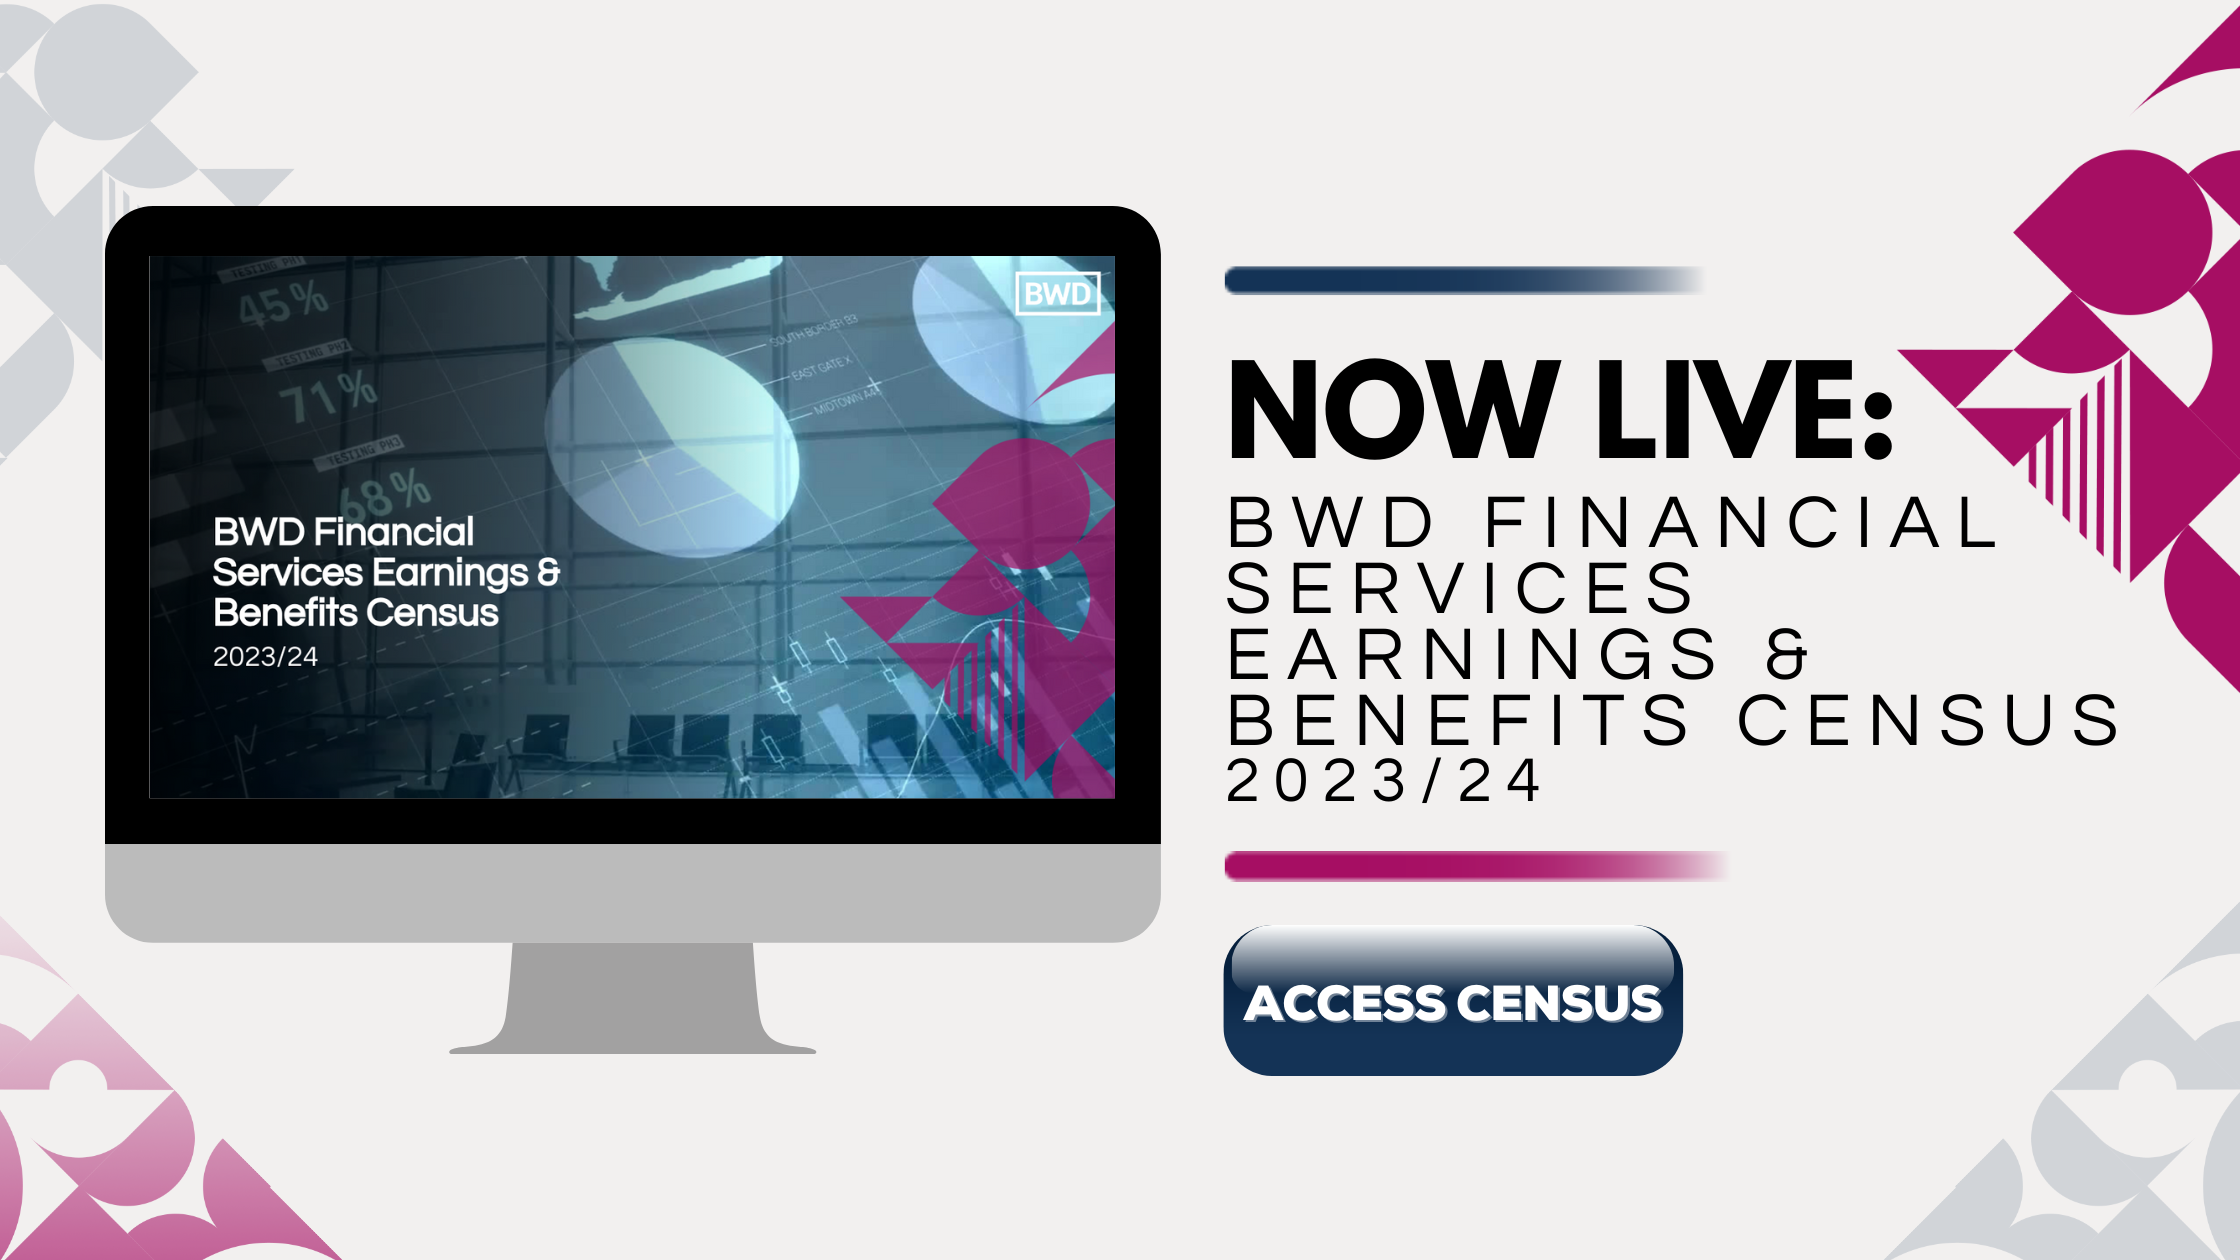 BWD Financial Services Earnings & Benefits Census 2023/24